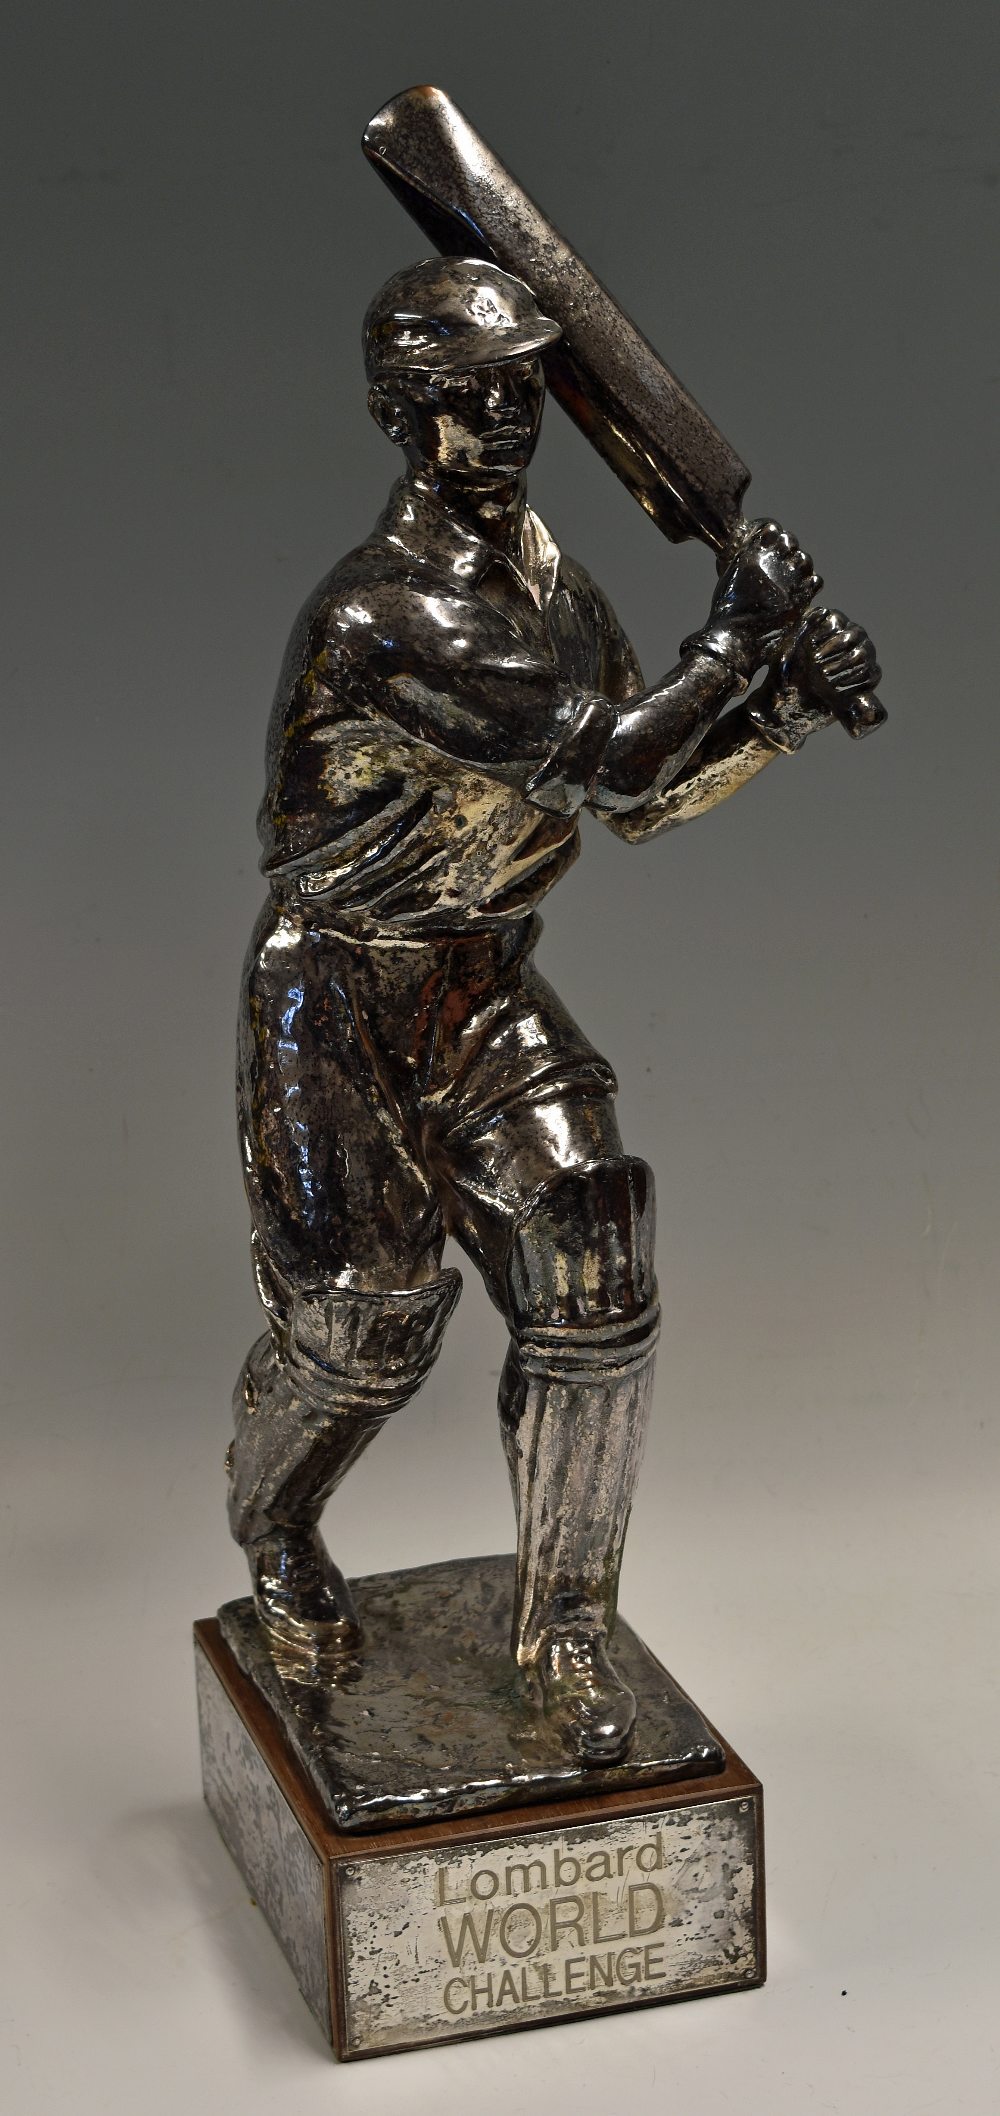 Lombard World Challenge Cricket Trophy U15’s Trophy - a large white metal Cricket Figure in